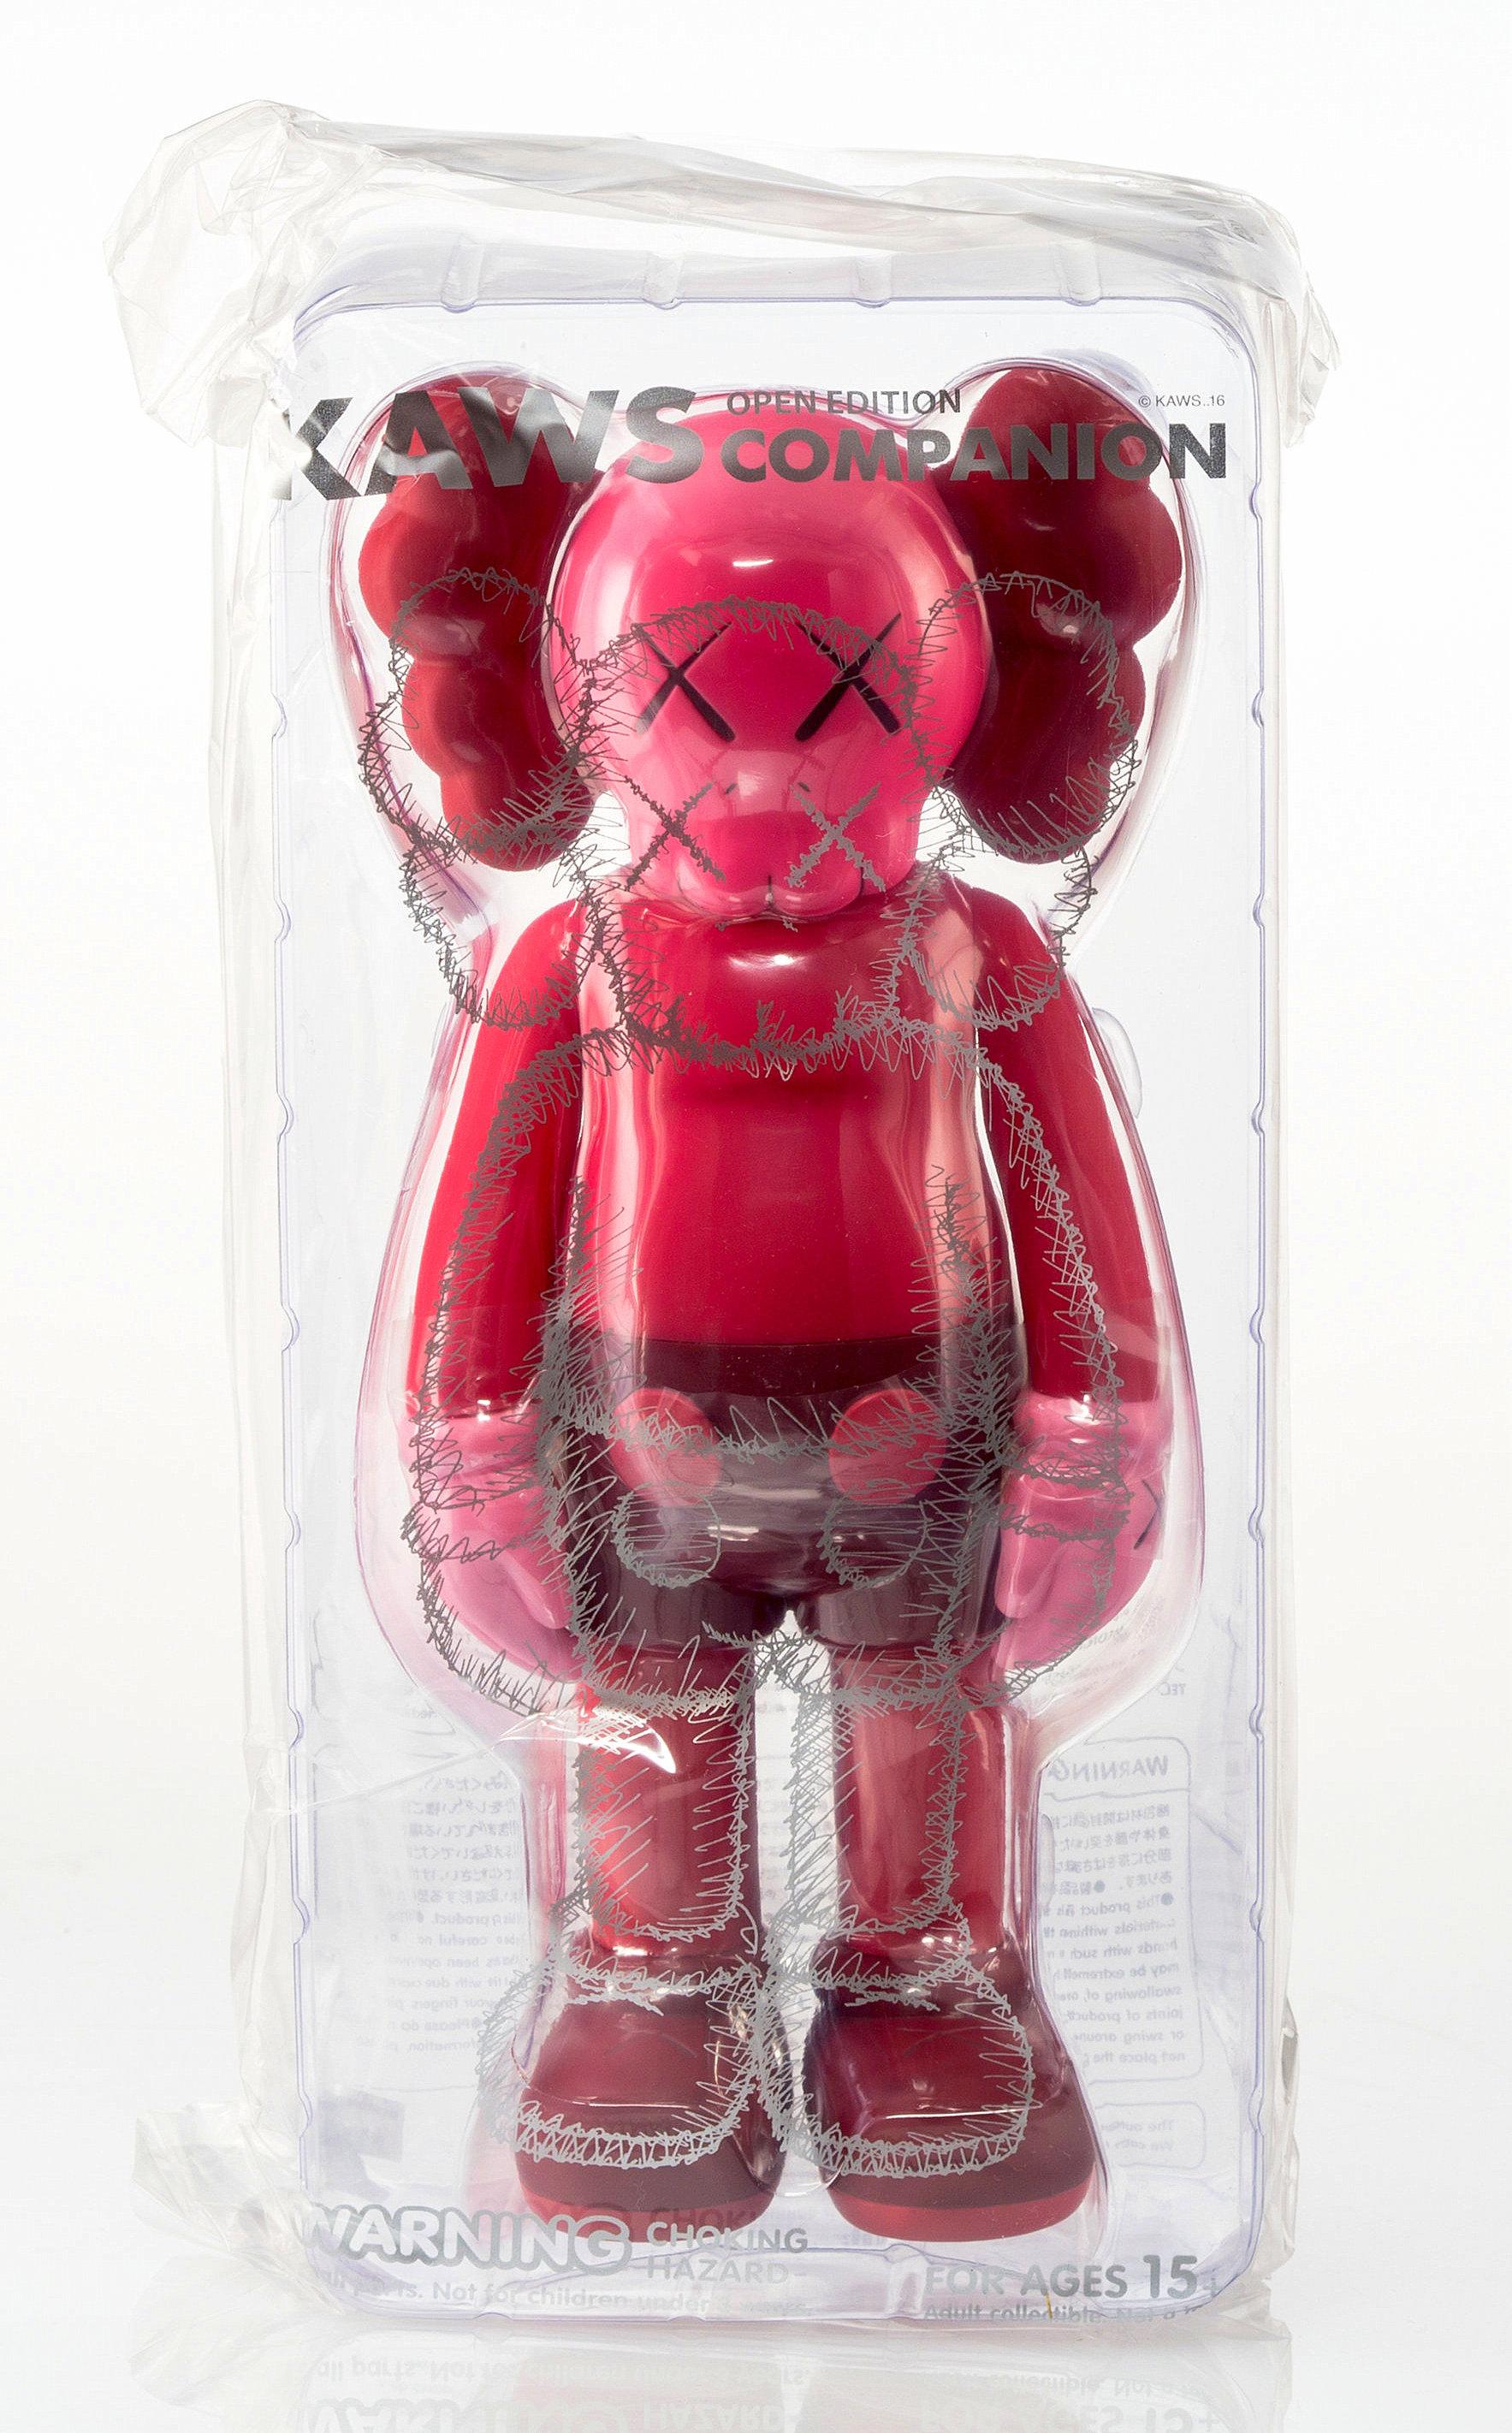 KAWS Companions, set of 2, Blush, Full and Flayed (2016) For Sale 9